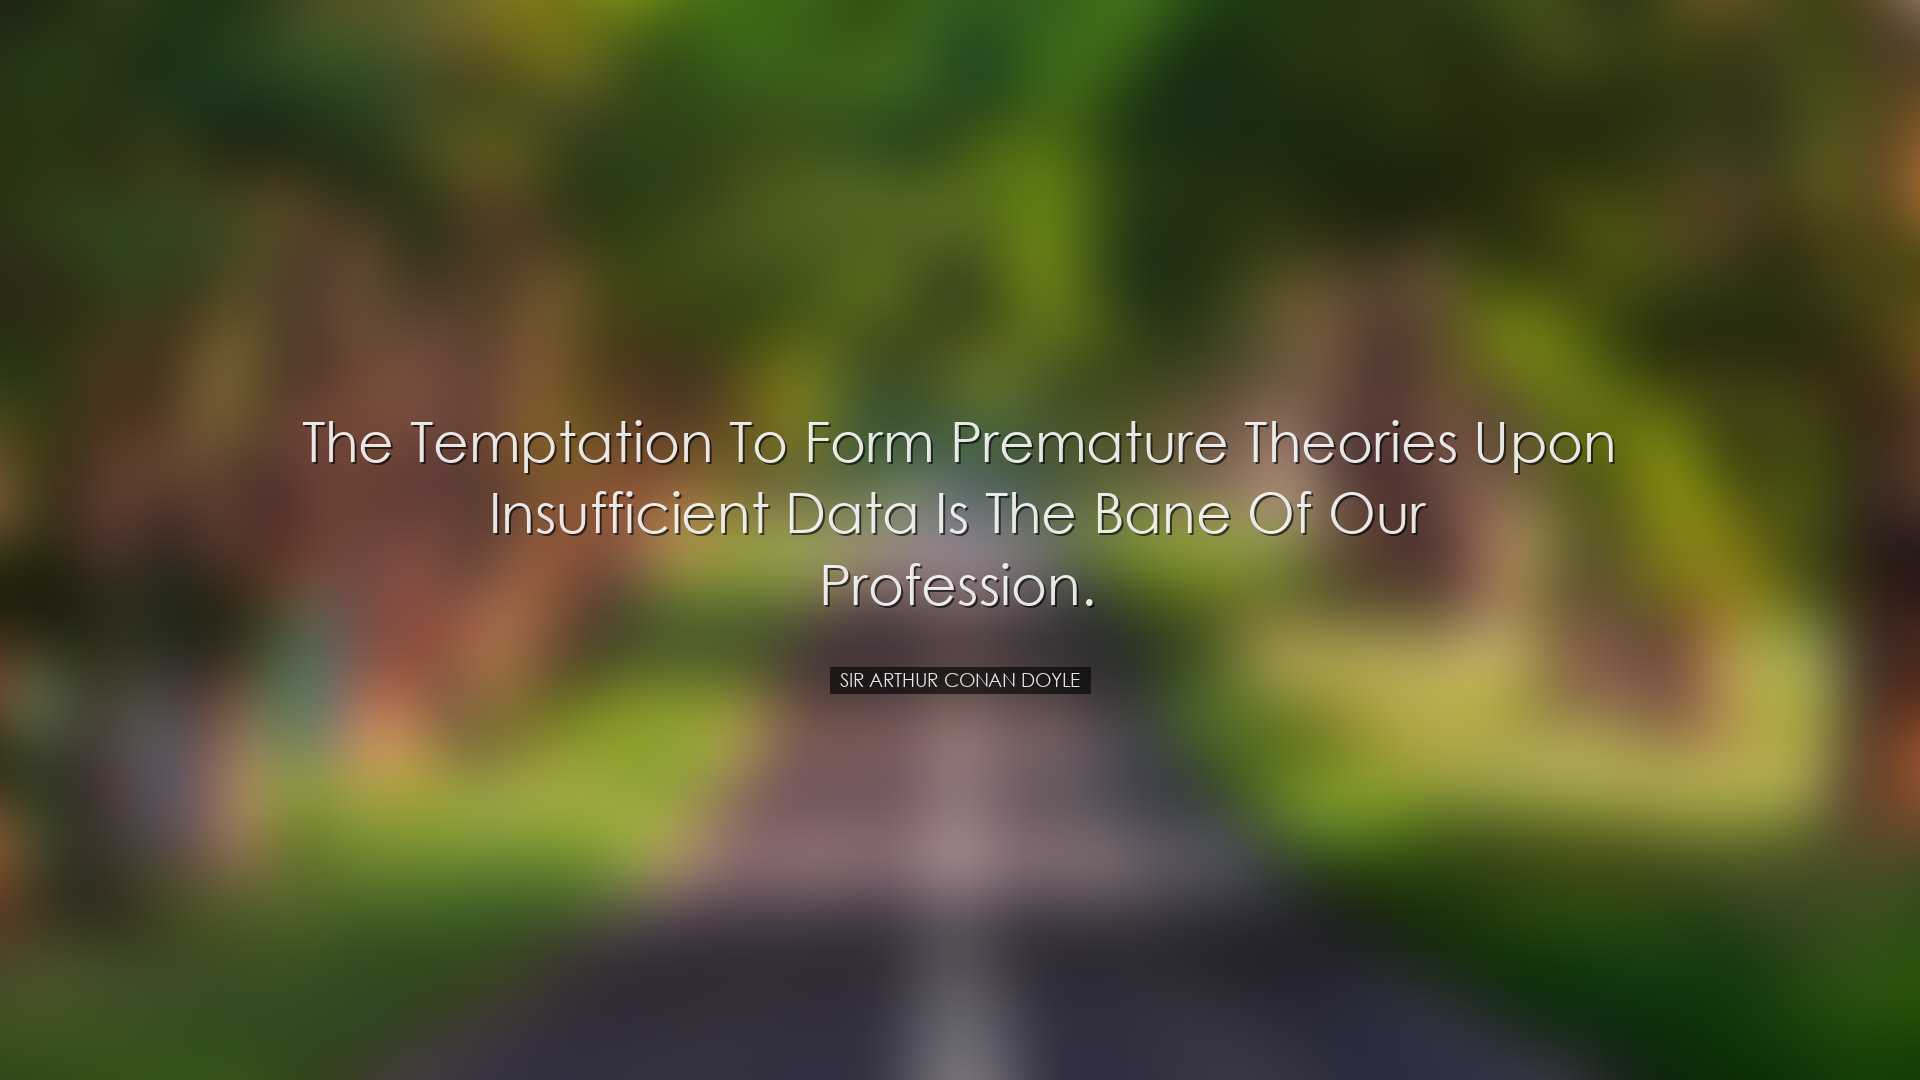 The temptation to form premature theories upon insufficient data i